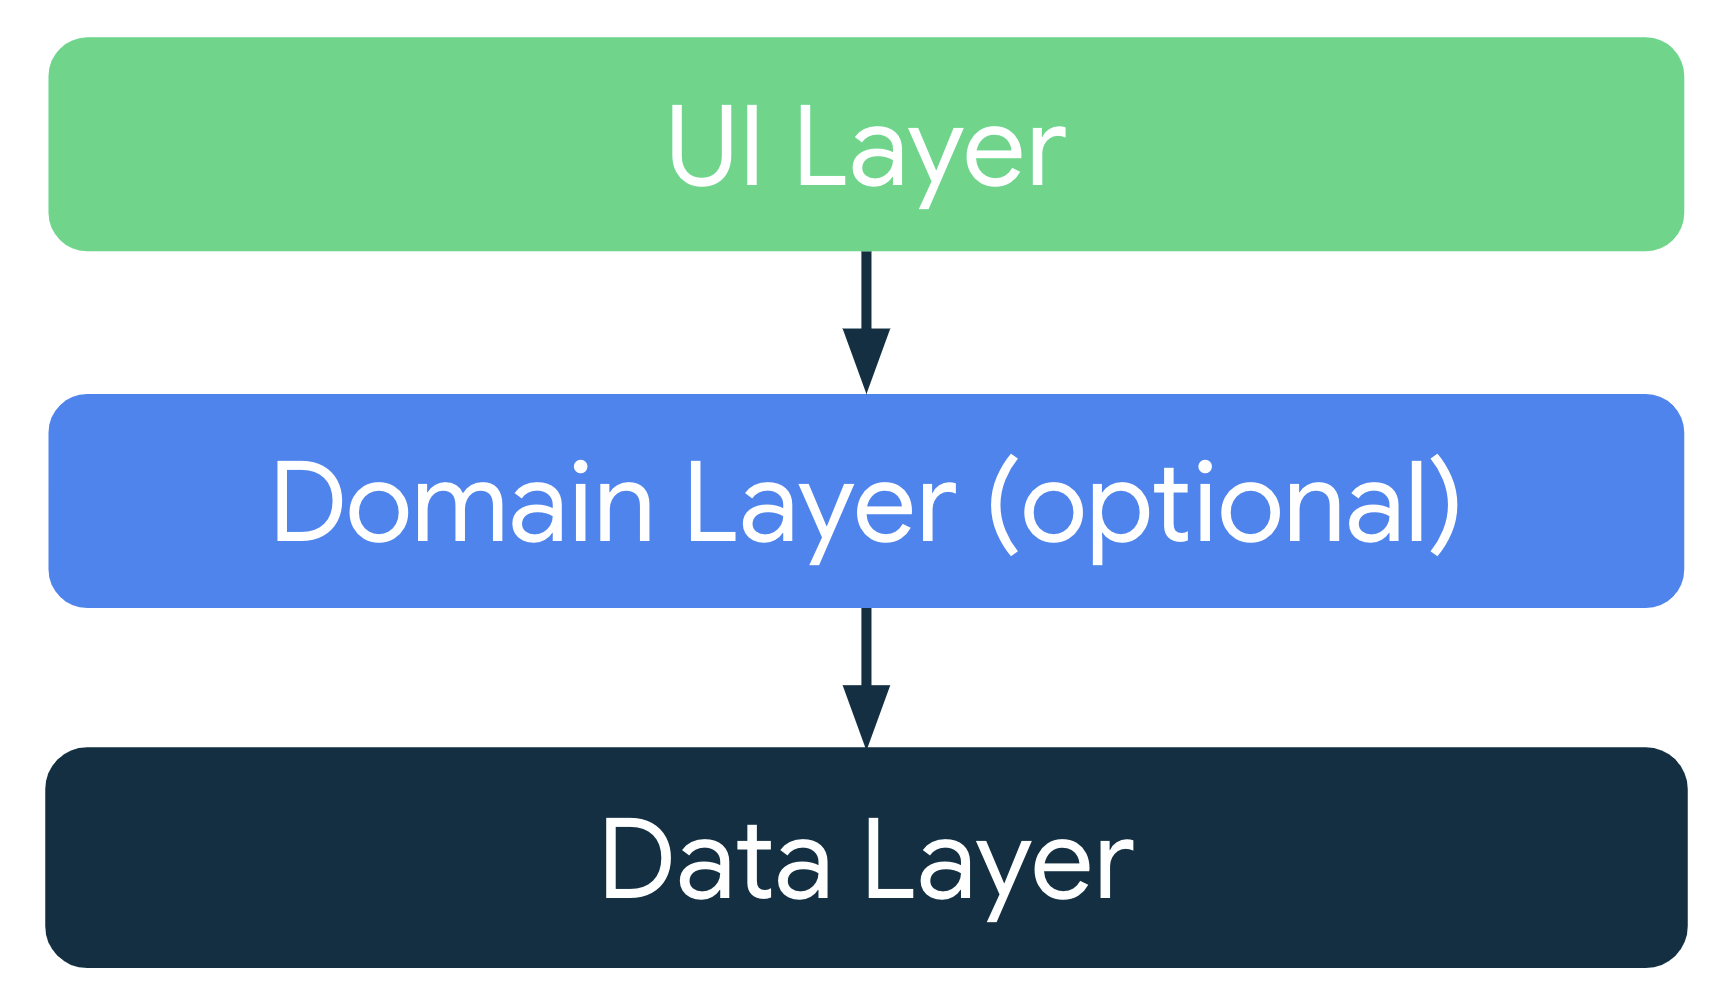 In a typical app architecture, the UI layer gets the application data
    from the data layer or from the optional domain layer, which sits between
    the UI layer and the data layer.